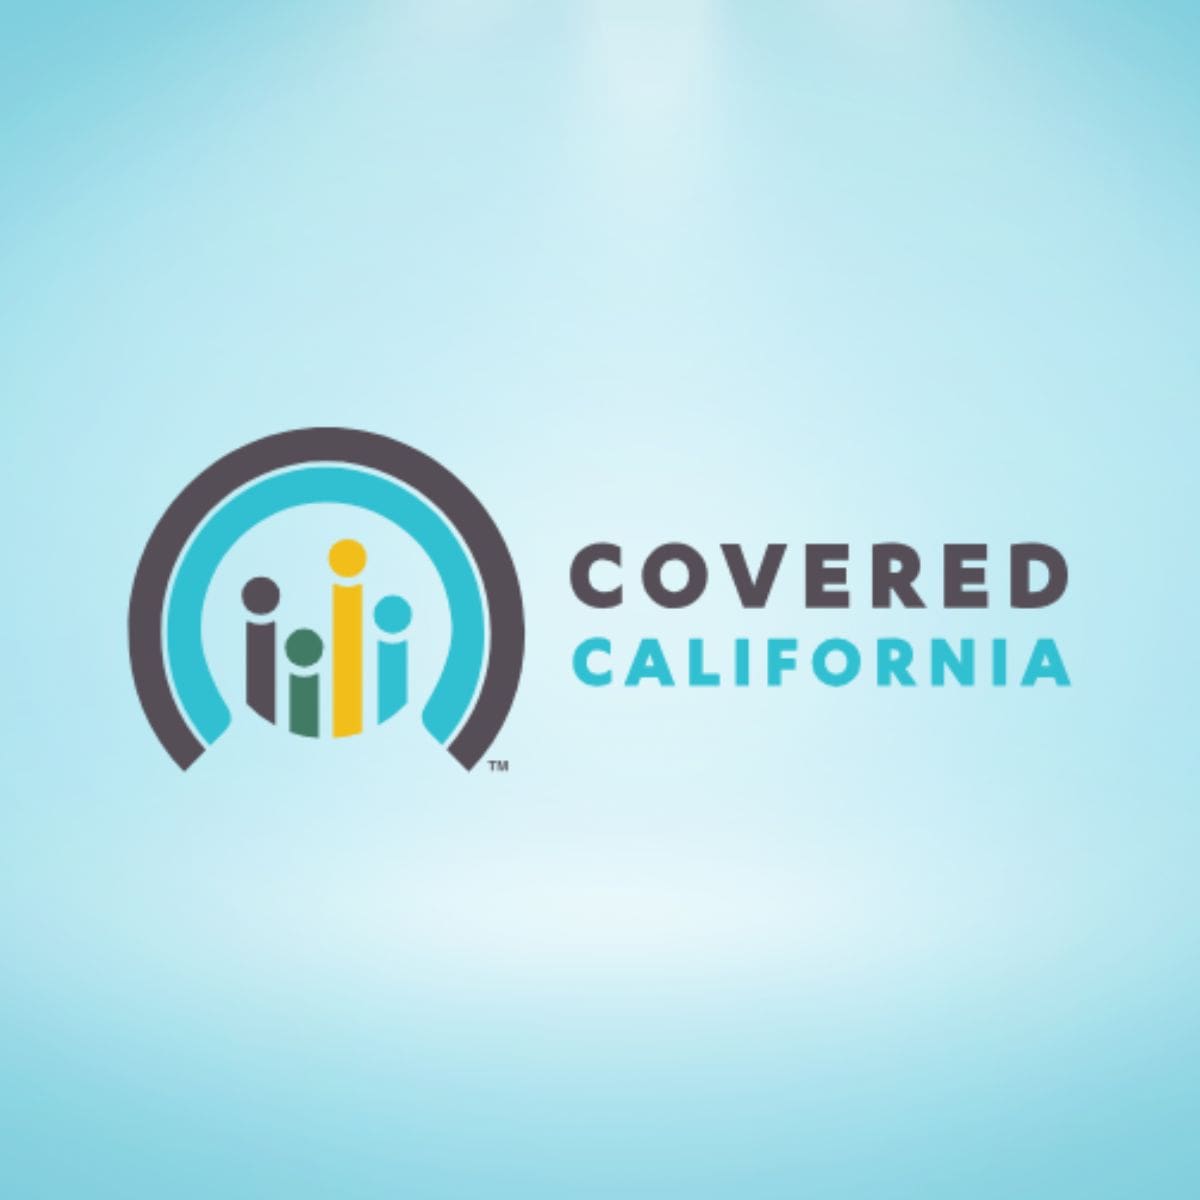 What Is Covered California?